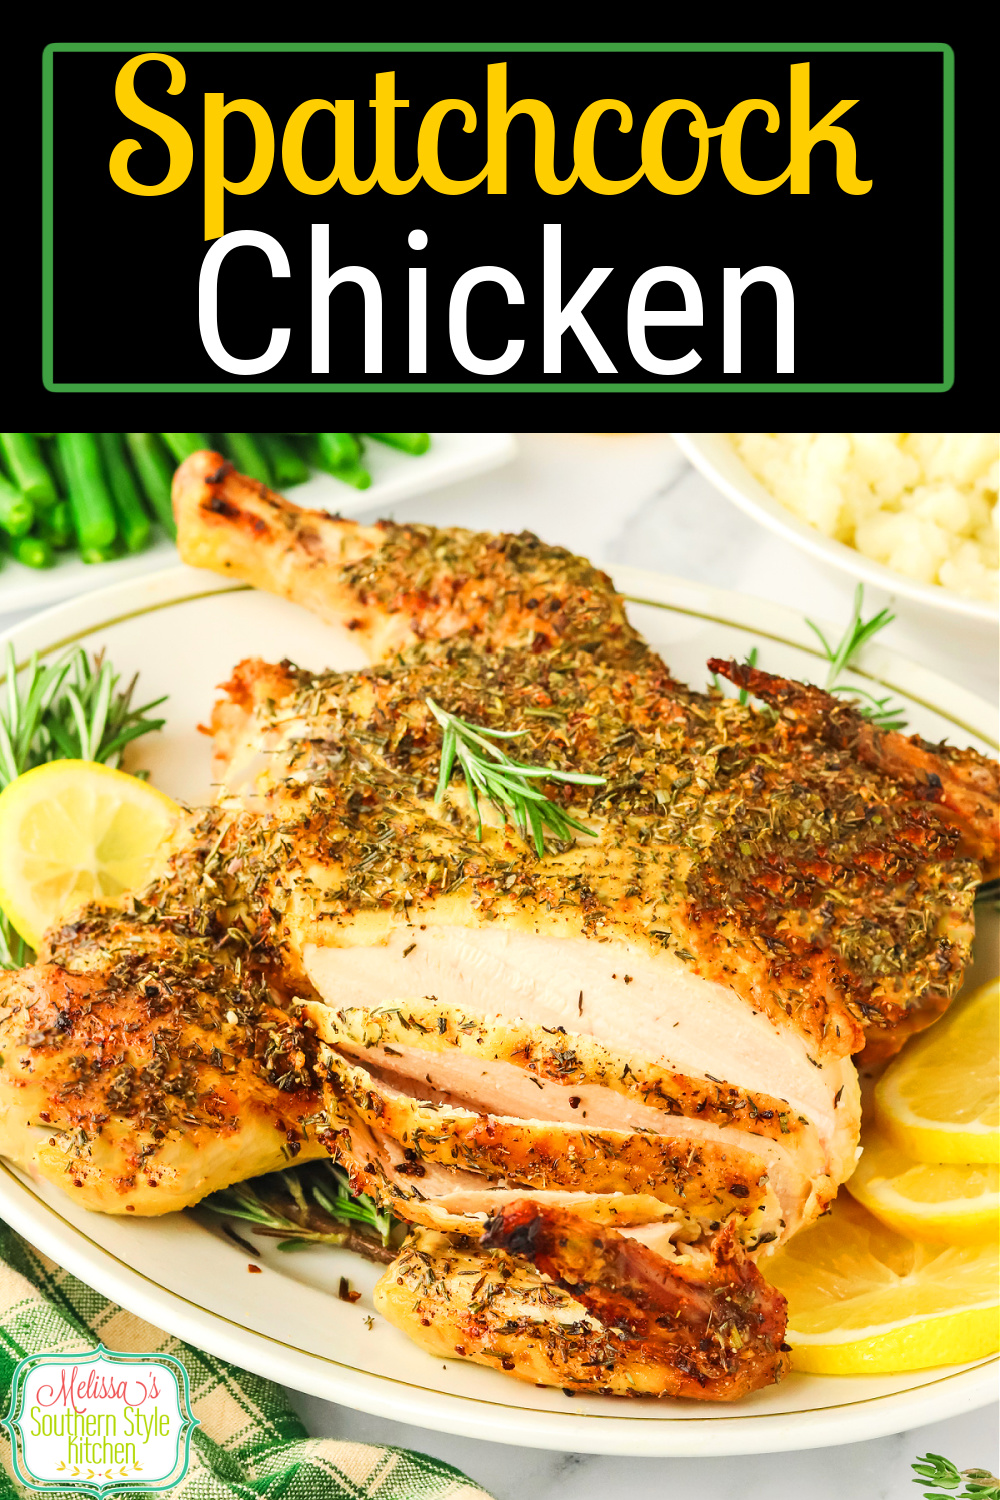 This juicy Spatchcock Chicken recipe features a simple technique that anyone can master. #roastchicken #easychickenrecipes #bakedchicken #spatchcockchicken via @melissasssk